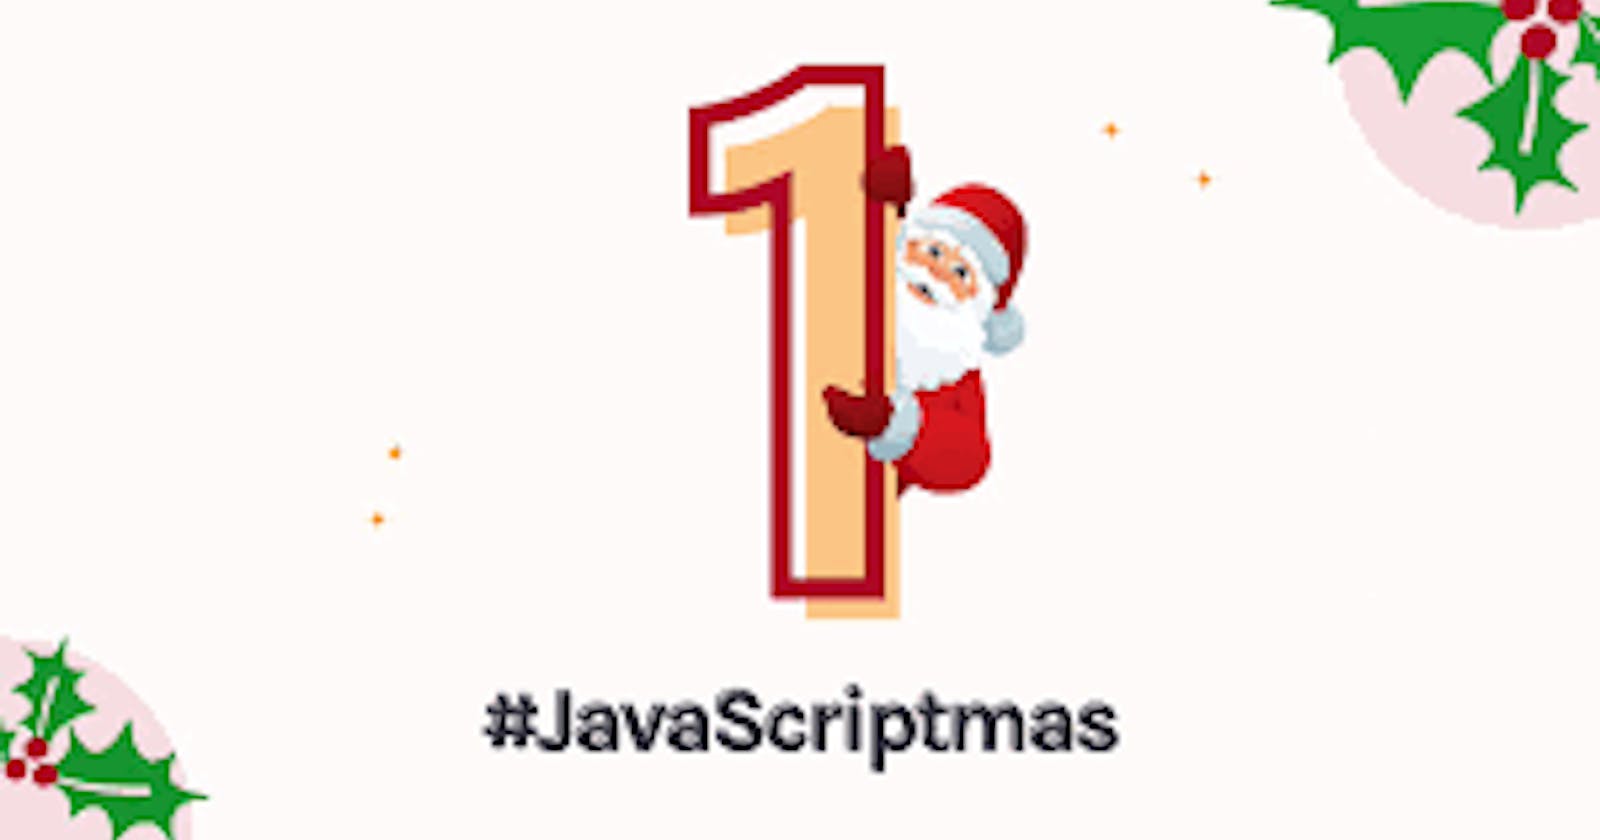 My #javascriptmas experience and solutions